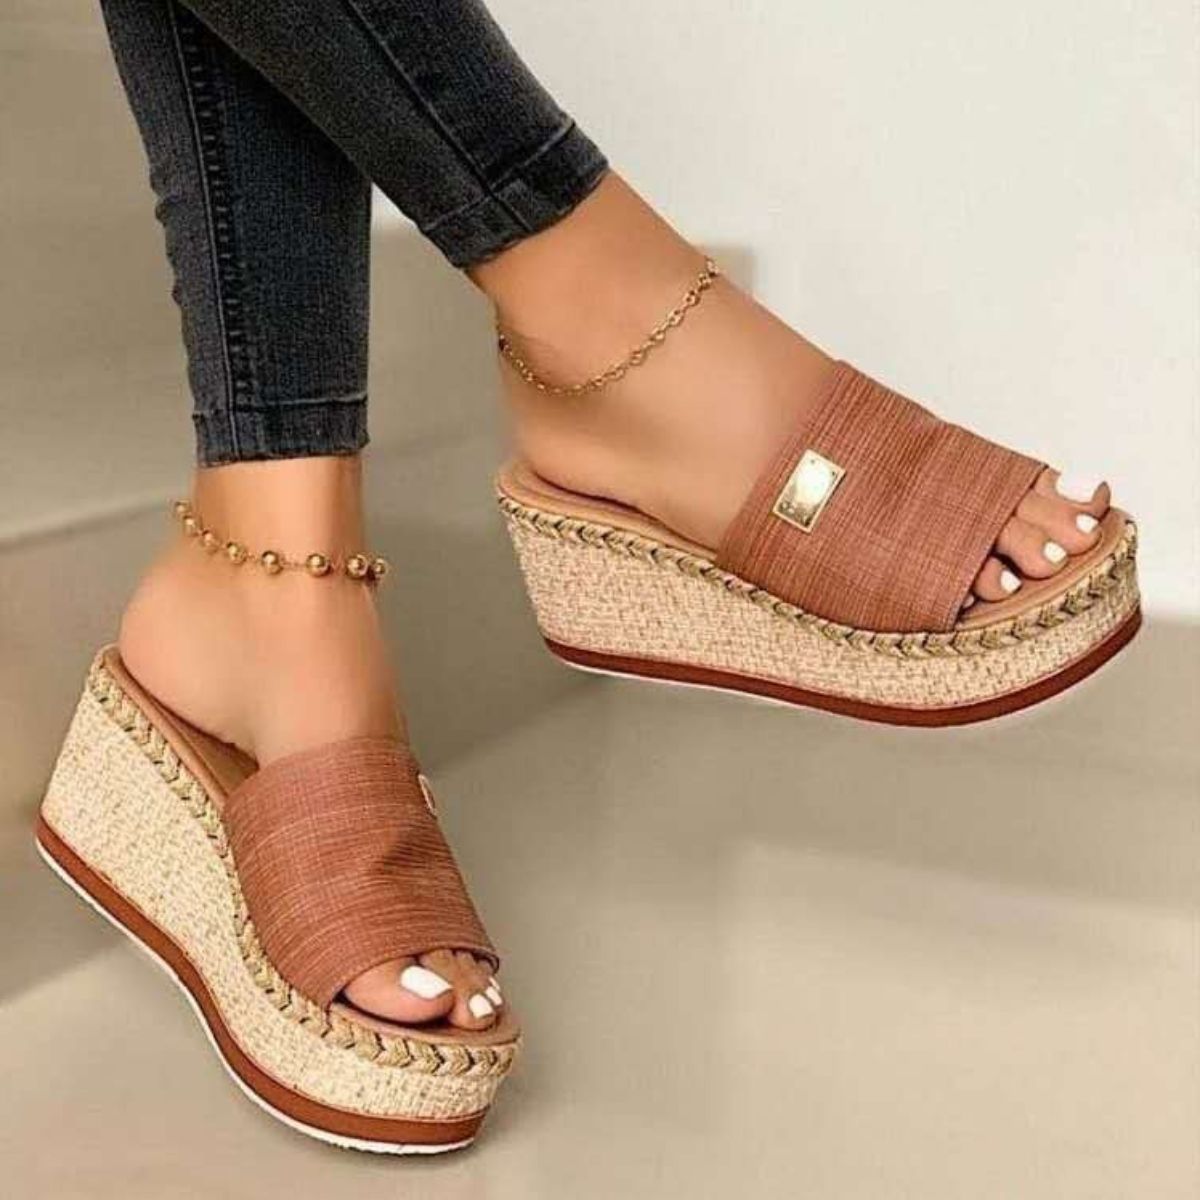 Leather Open Toe Sandals